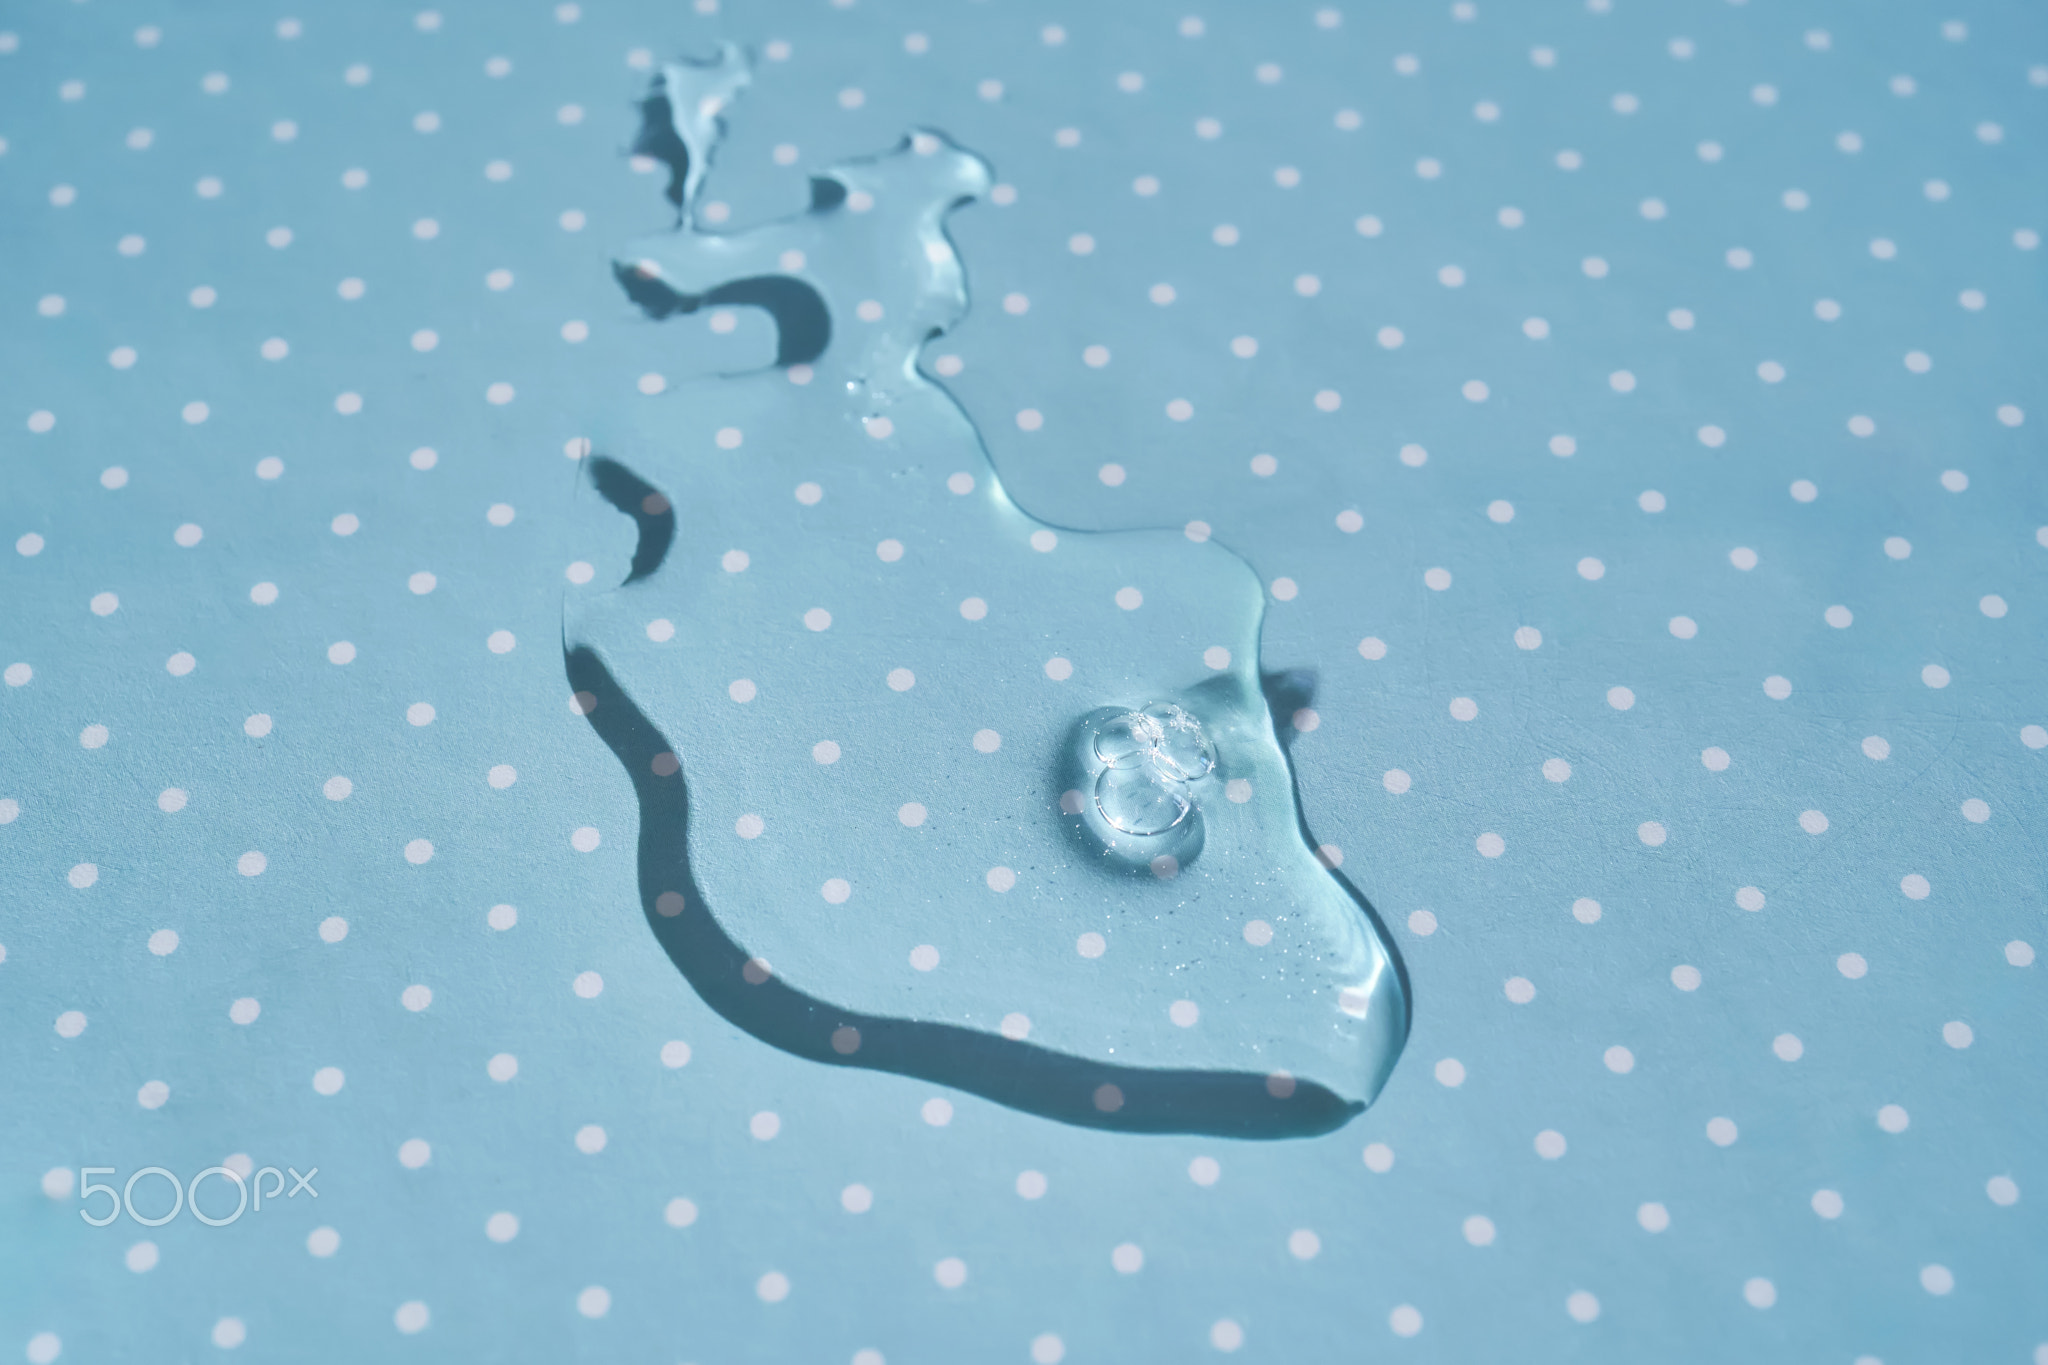 A drop of water or cosmetic serum on a blue polka dot background.